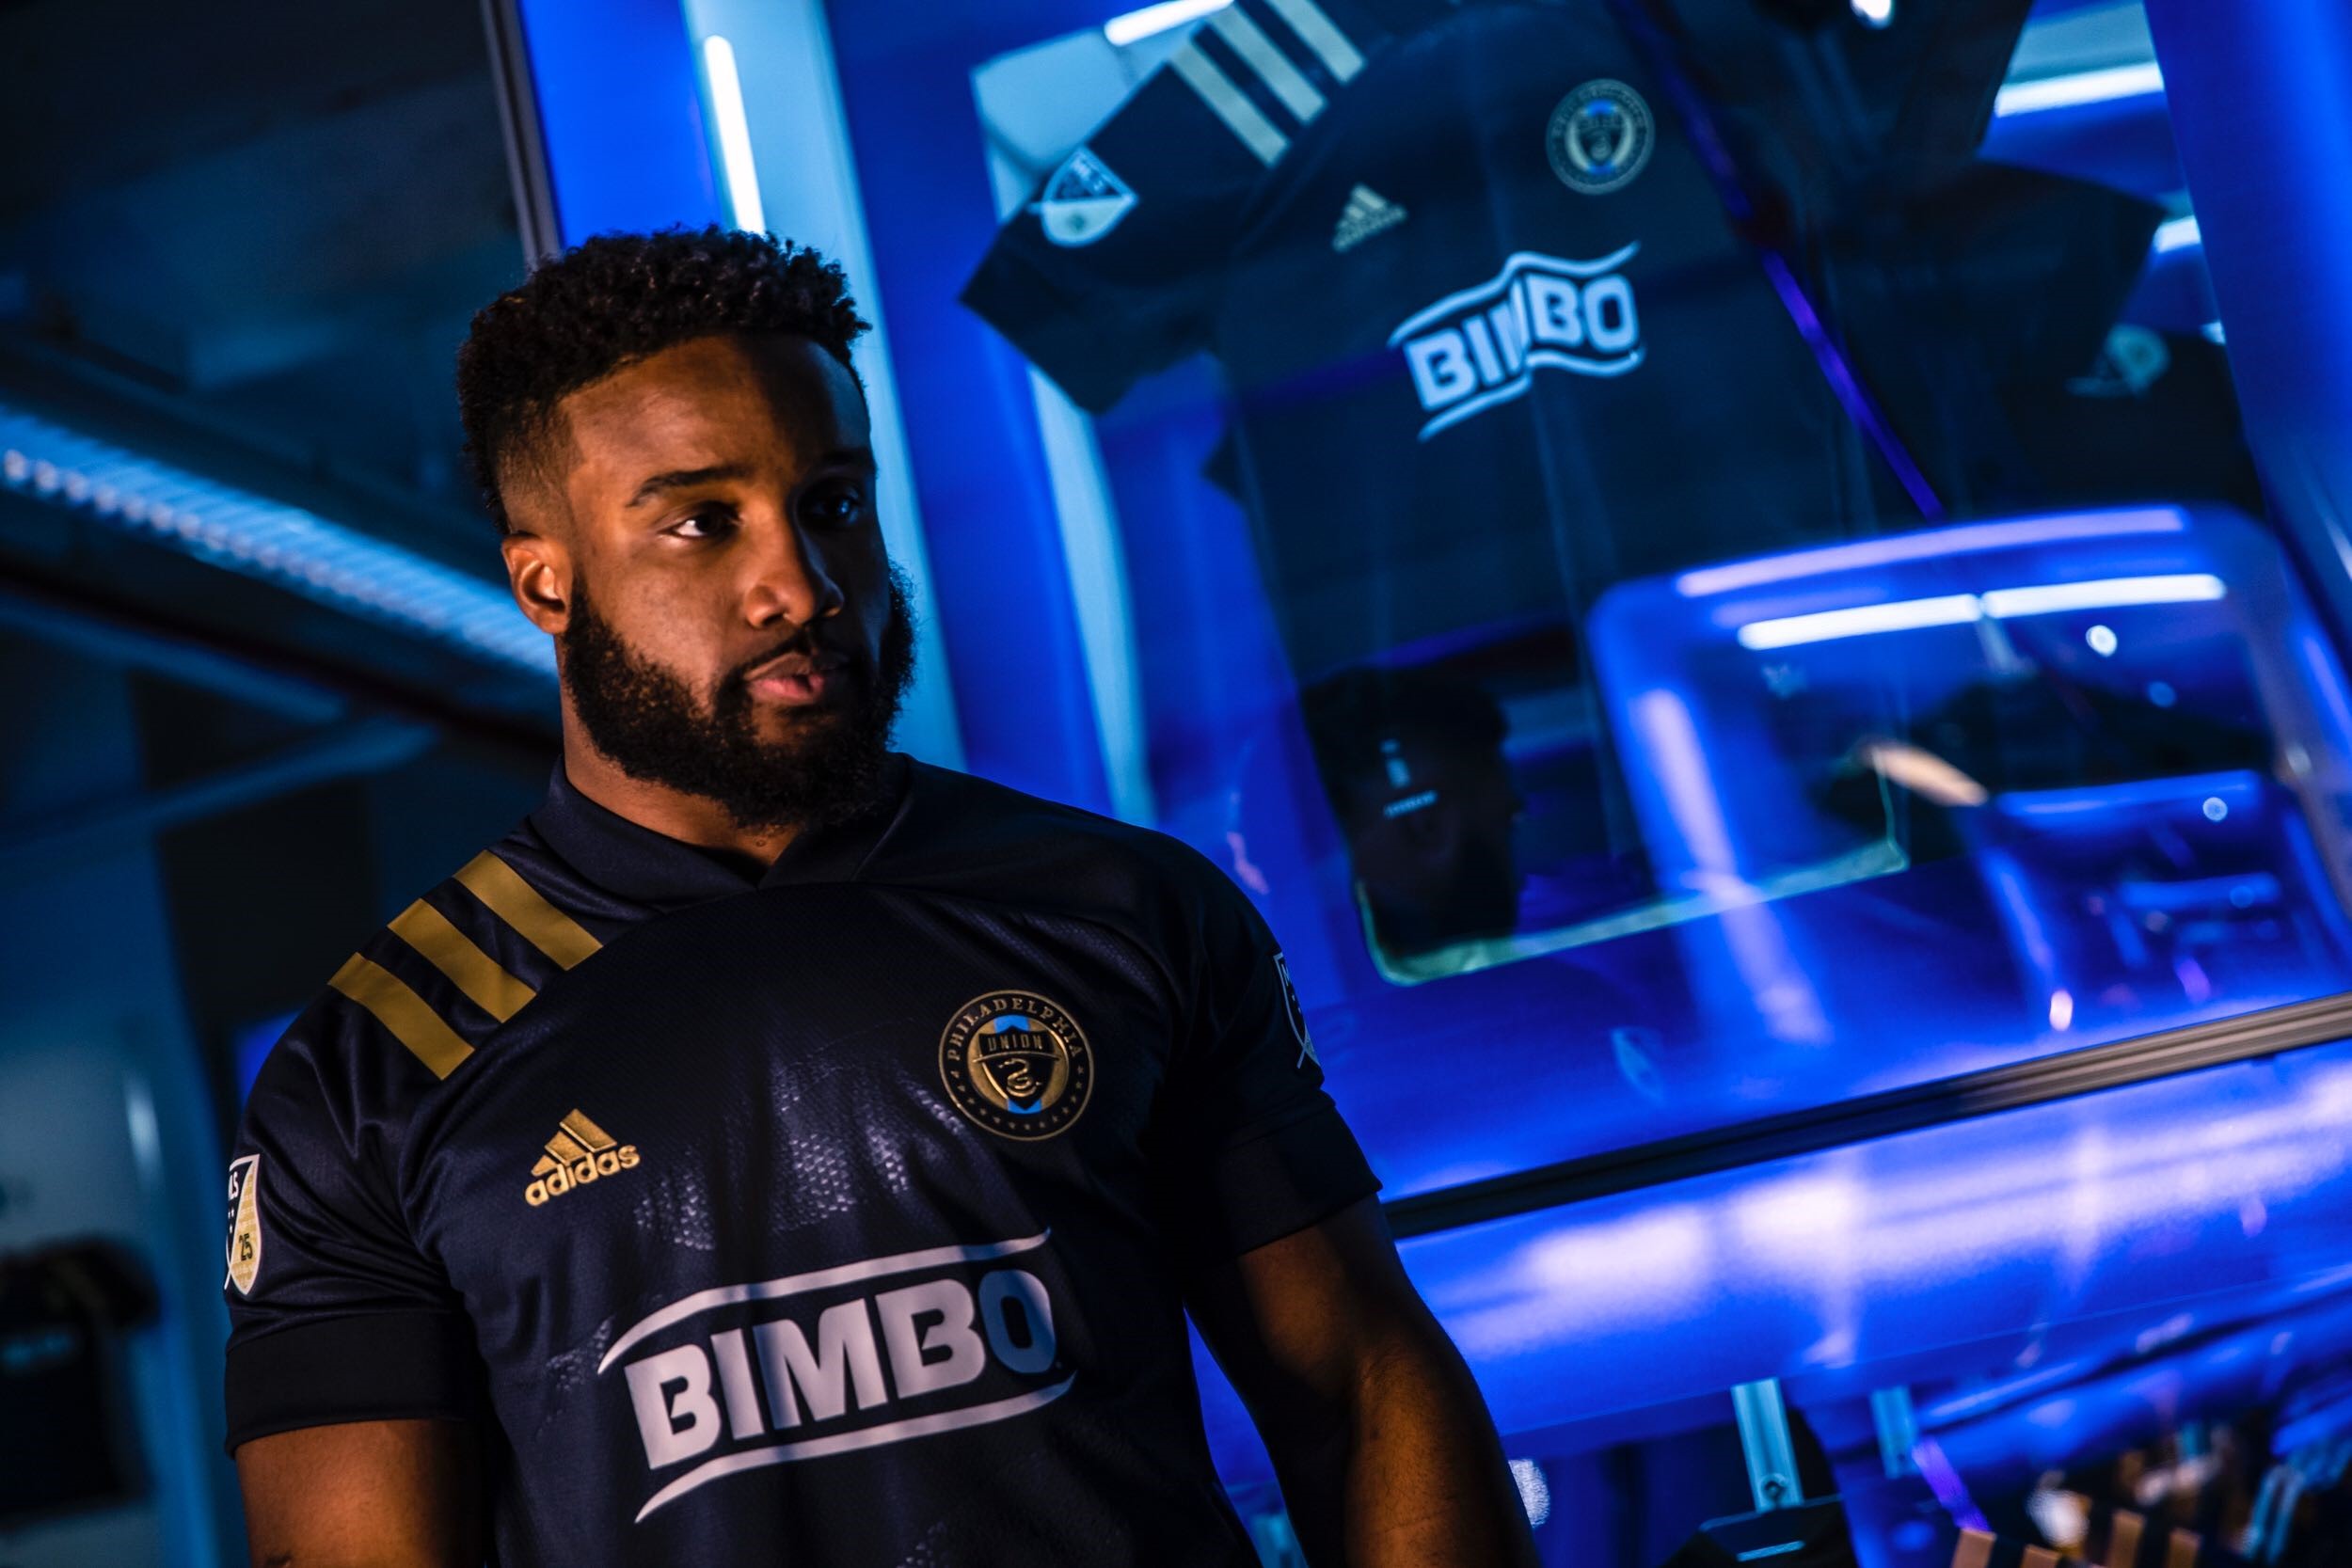 Cheering for laundry: the new Union jersey – The Philly Soccer Page